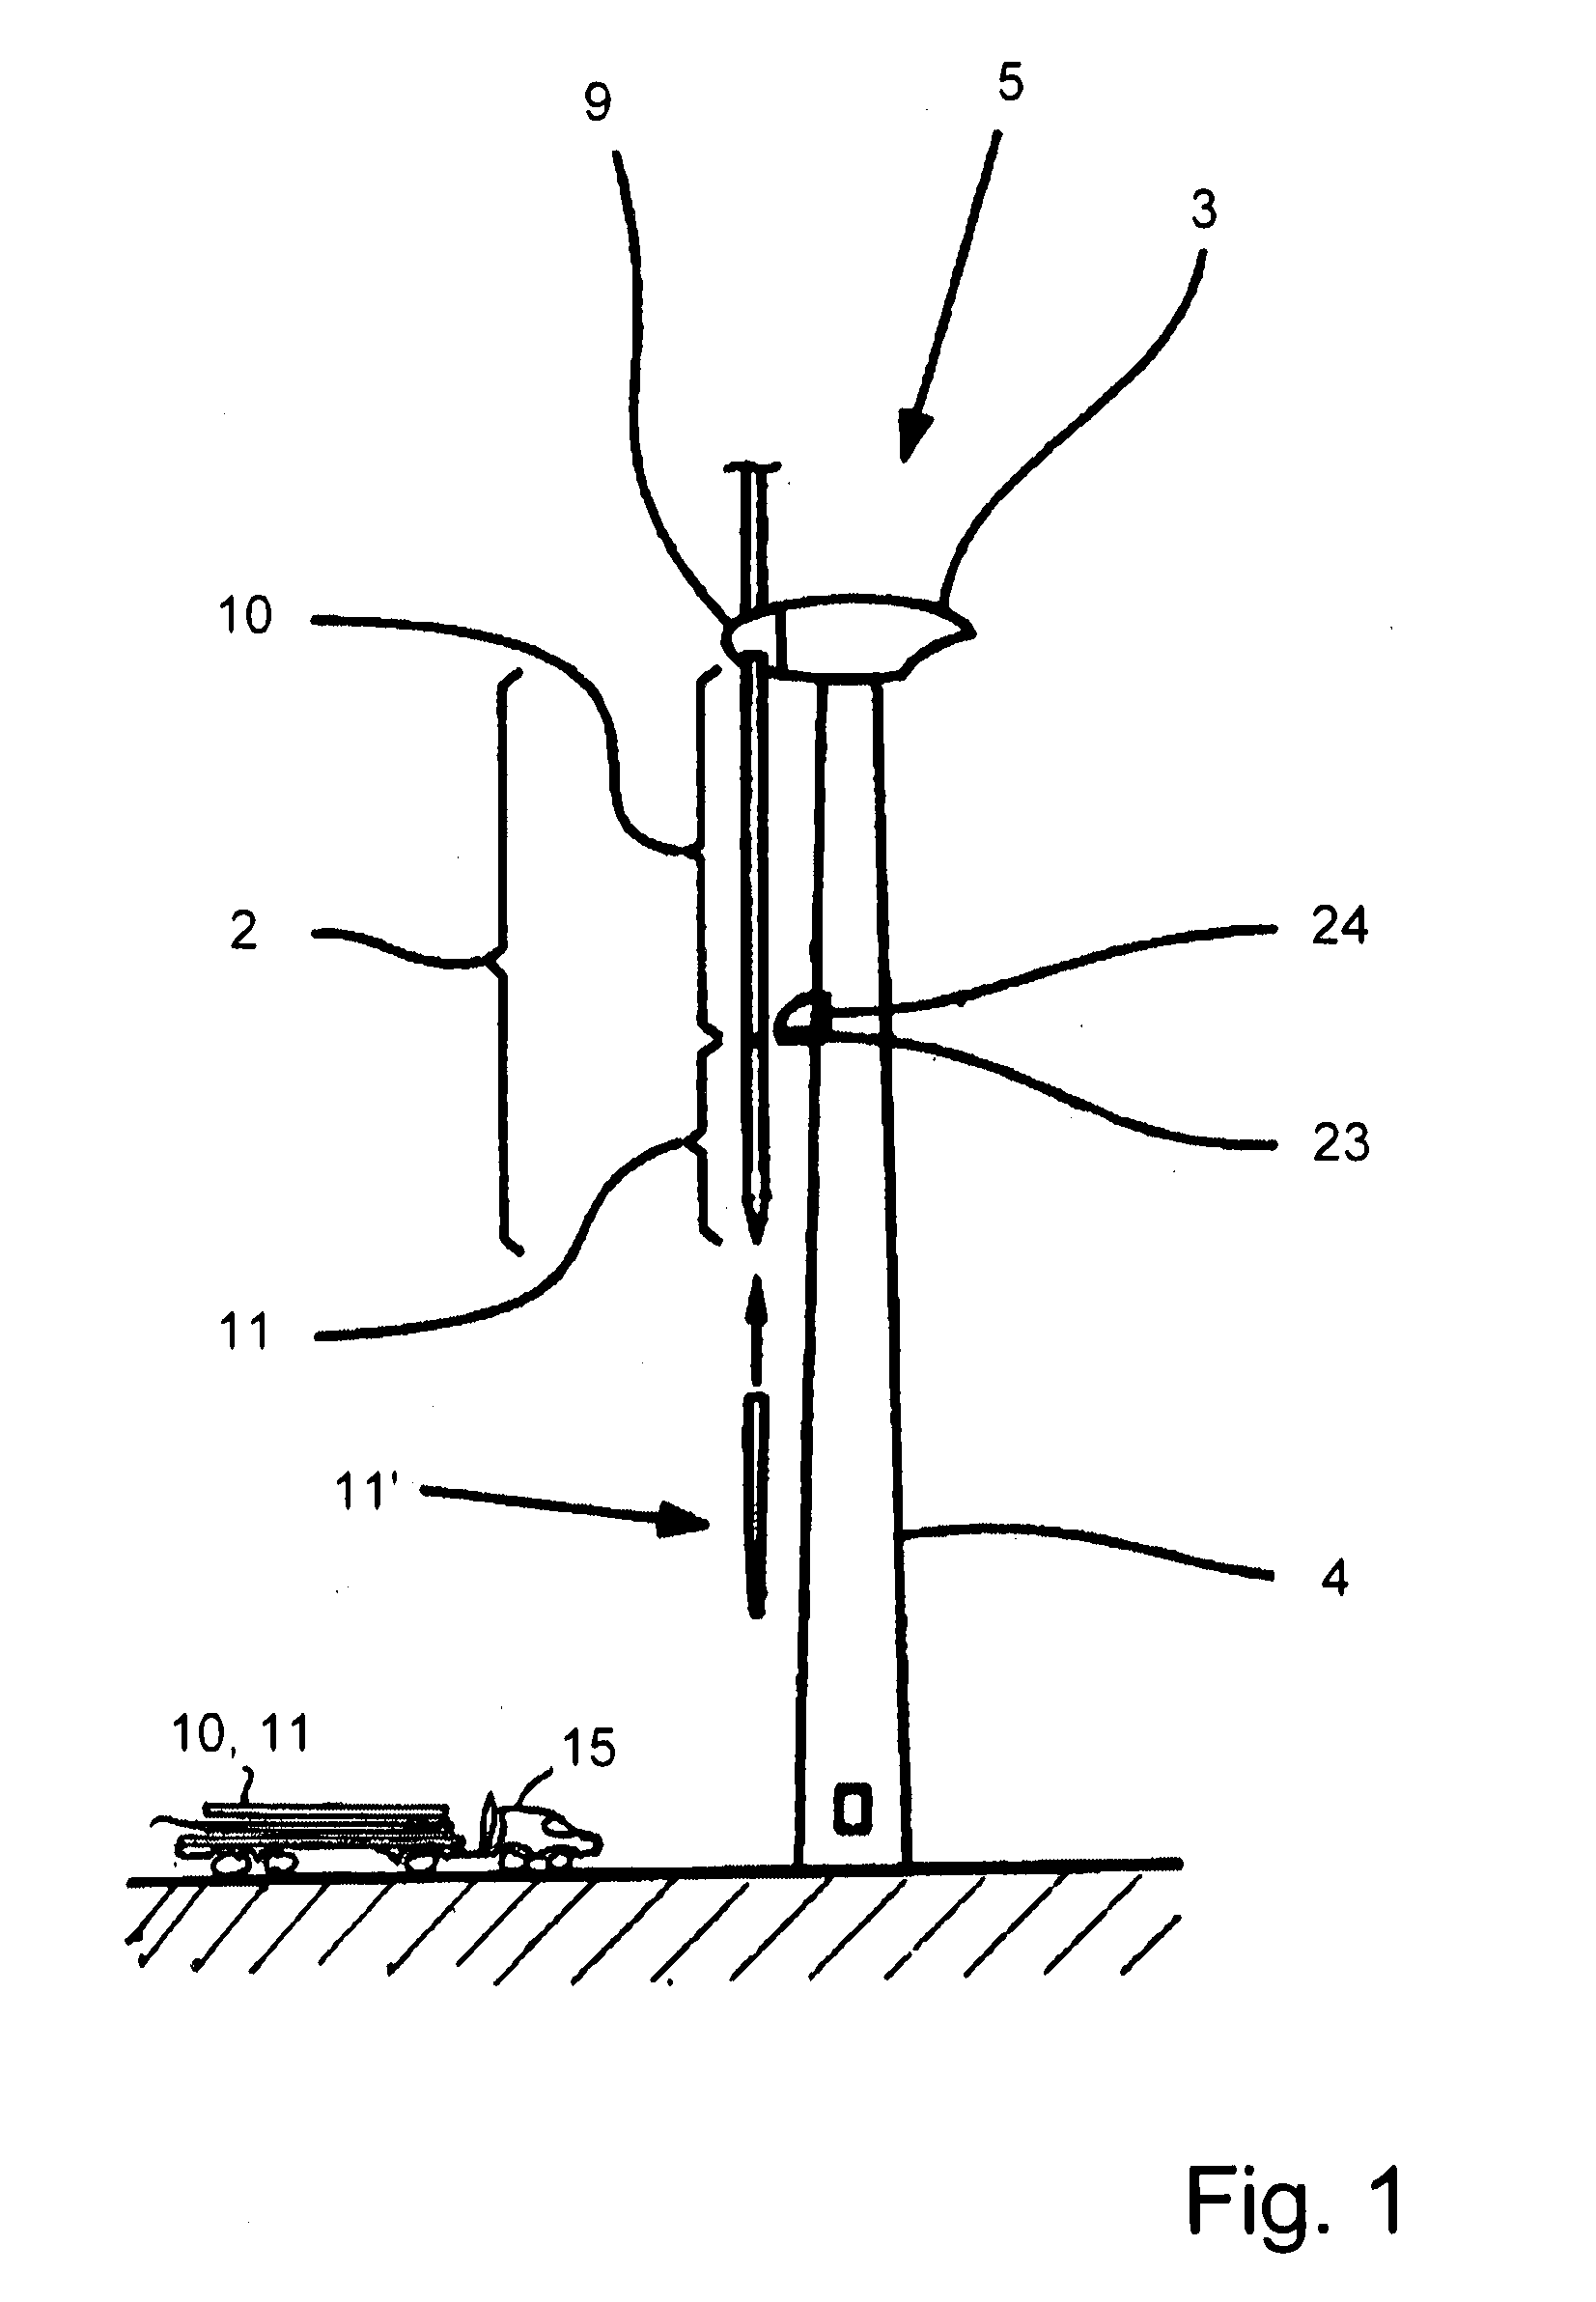 Modular rotor blade for a power-generating turbine and a method for assembling a power-generating turbine with modular rotor blades